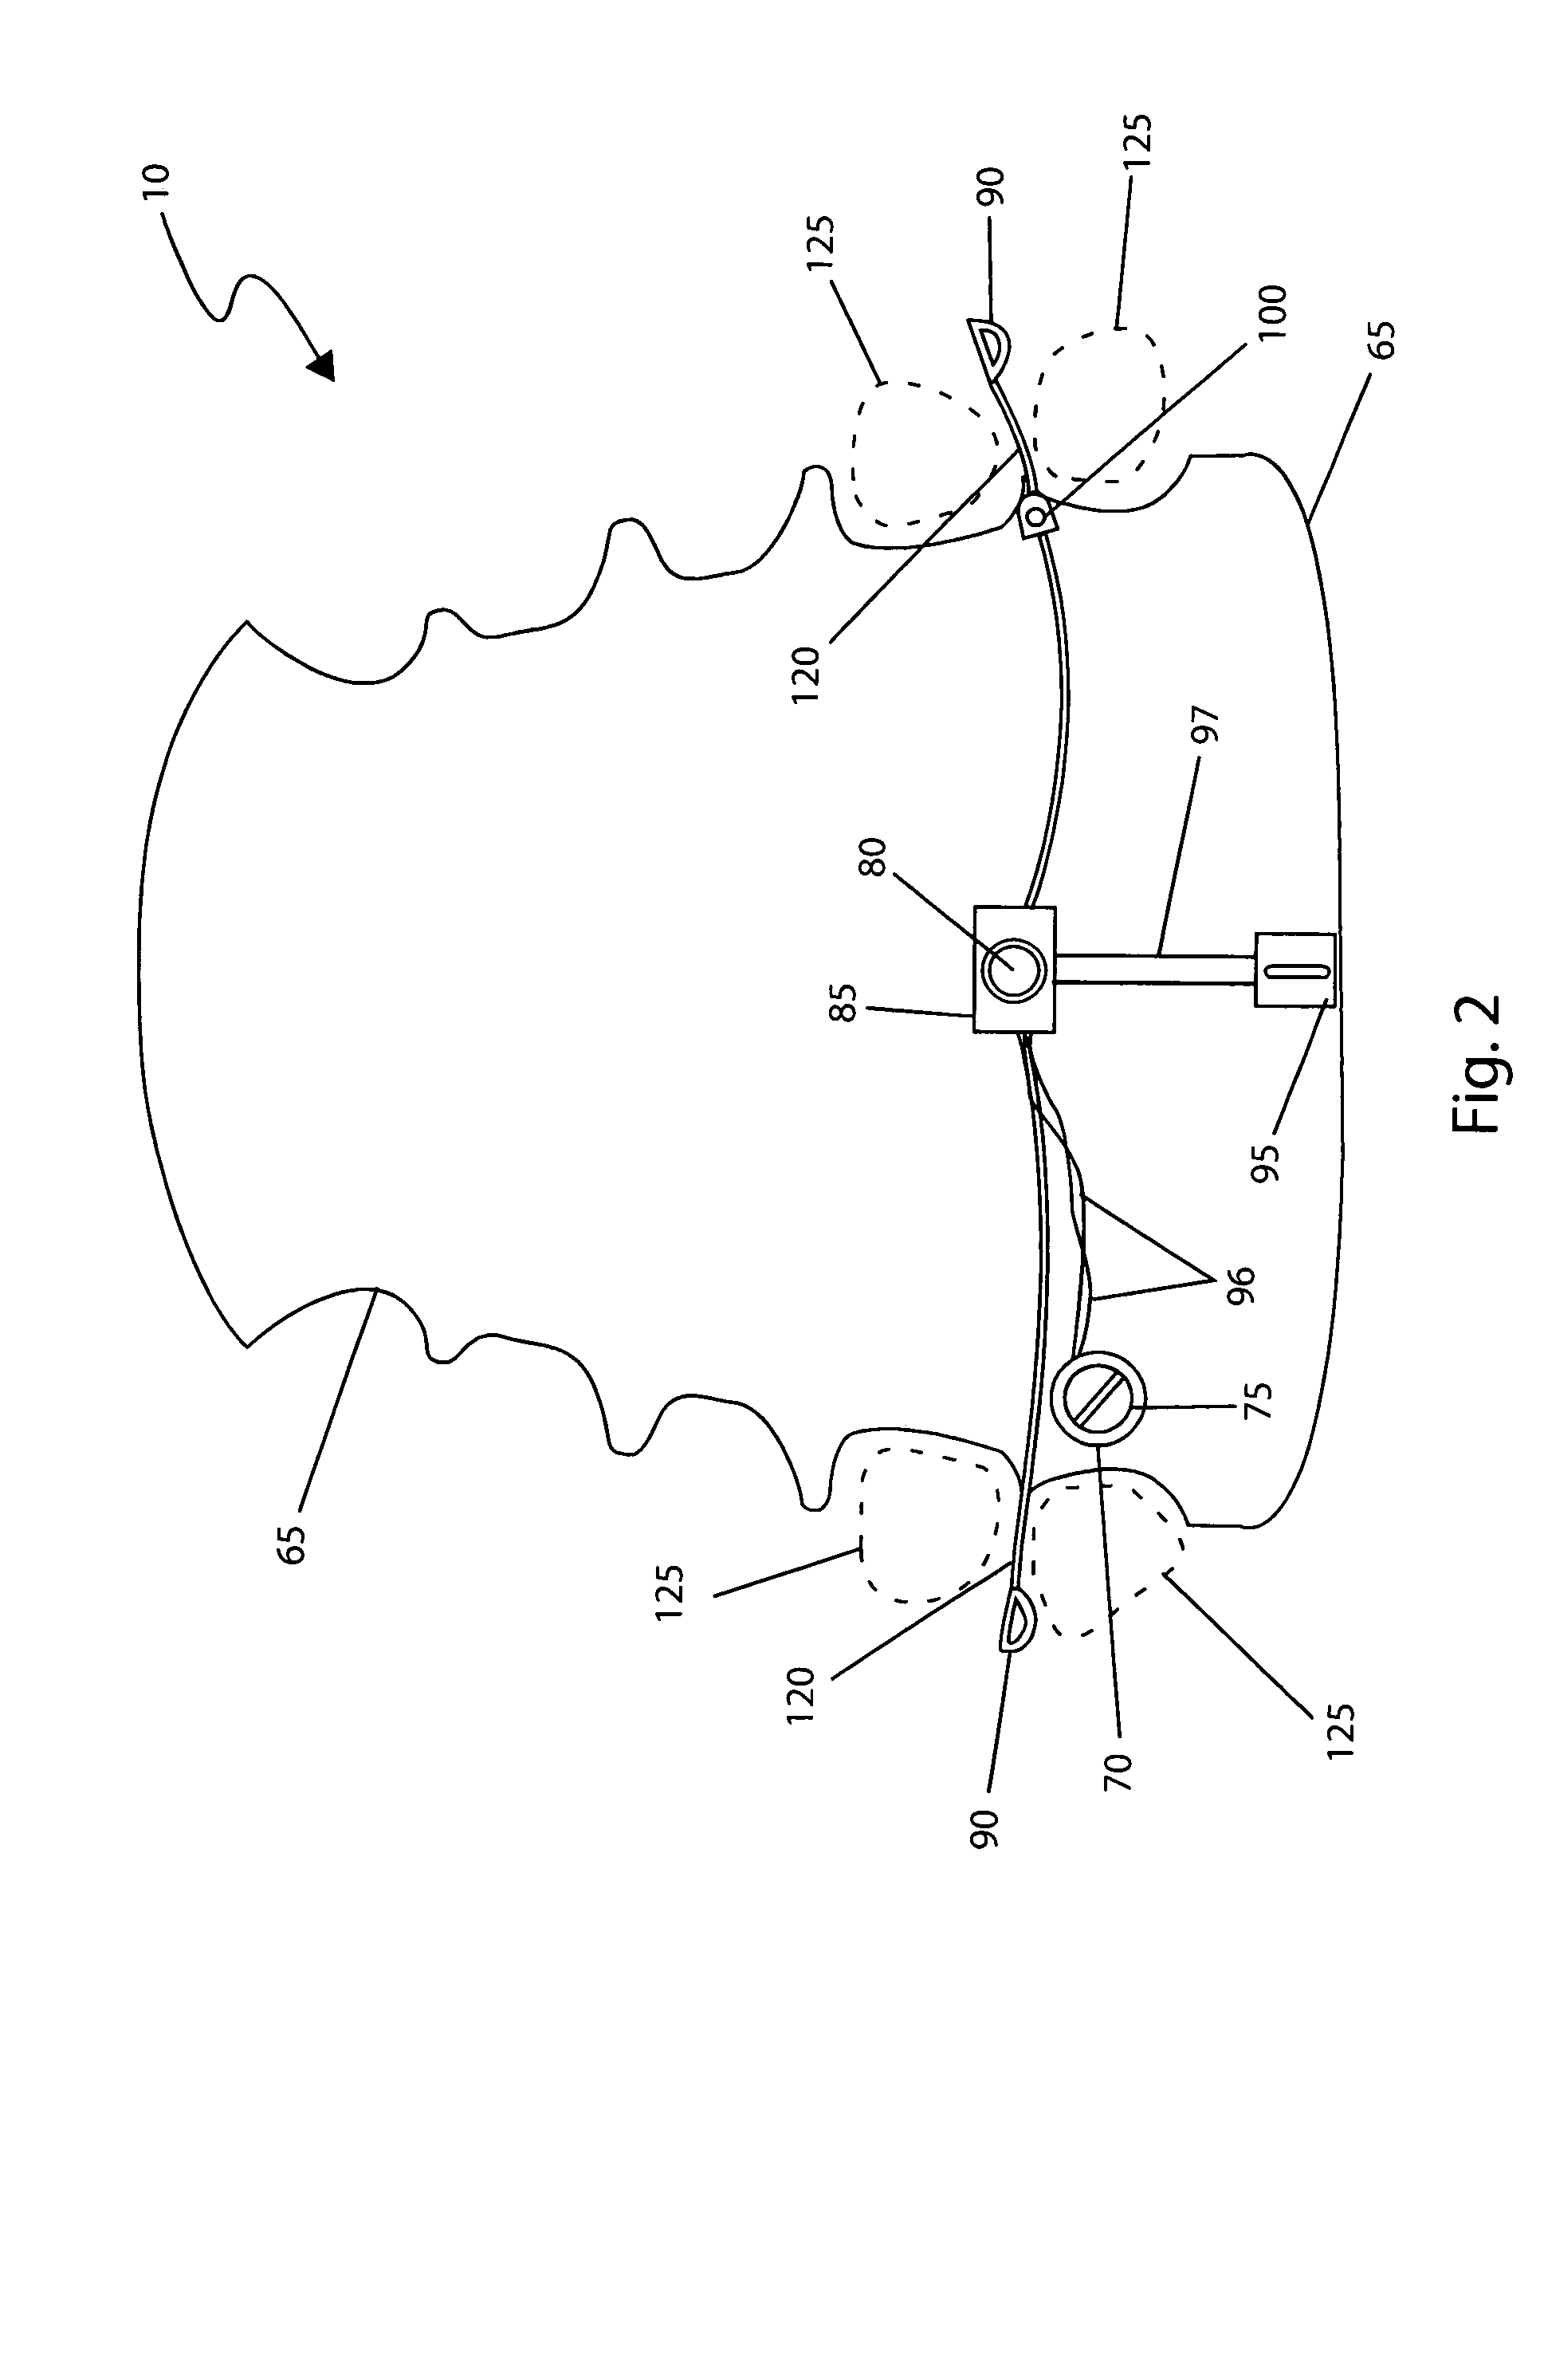 Oral hearing aid device and method of use thereof